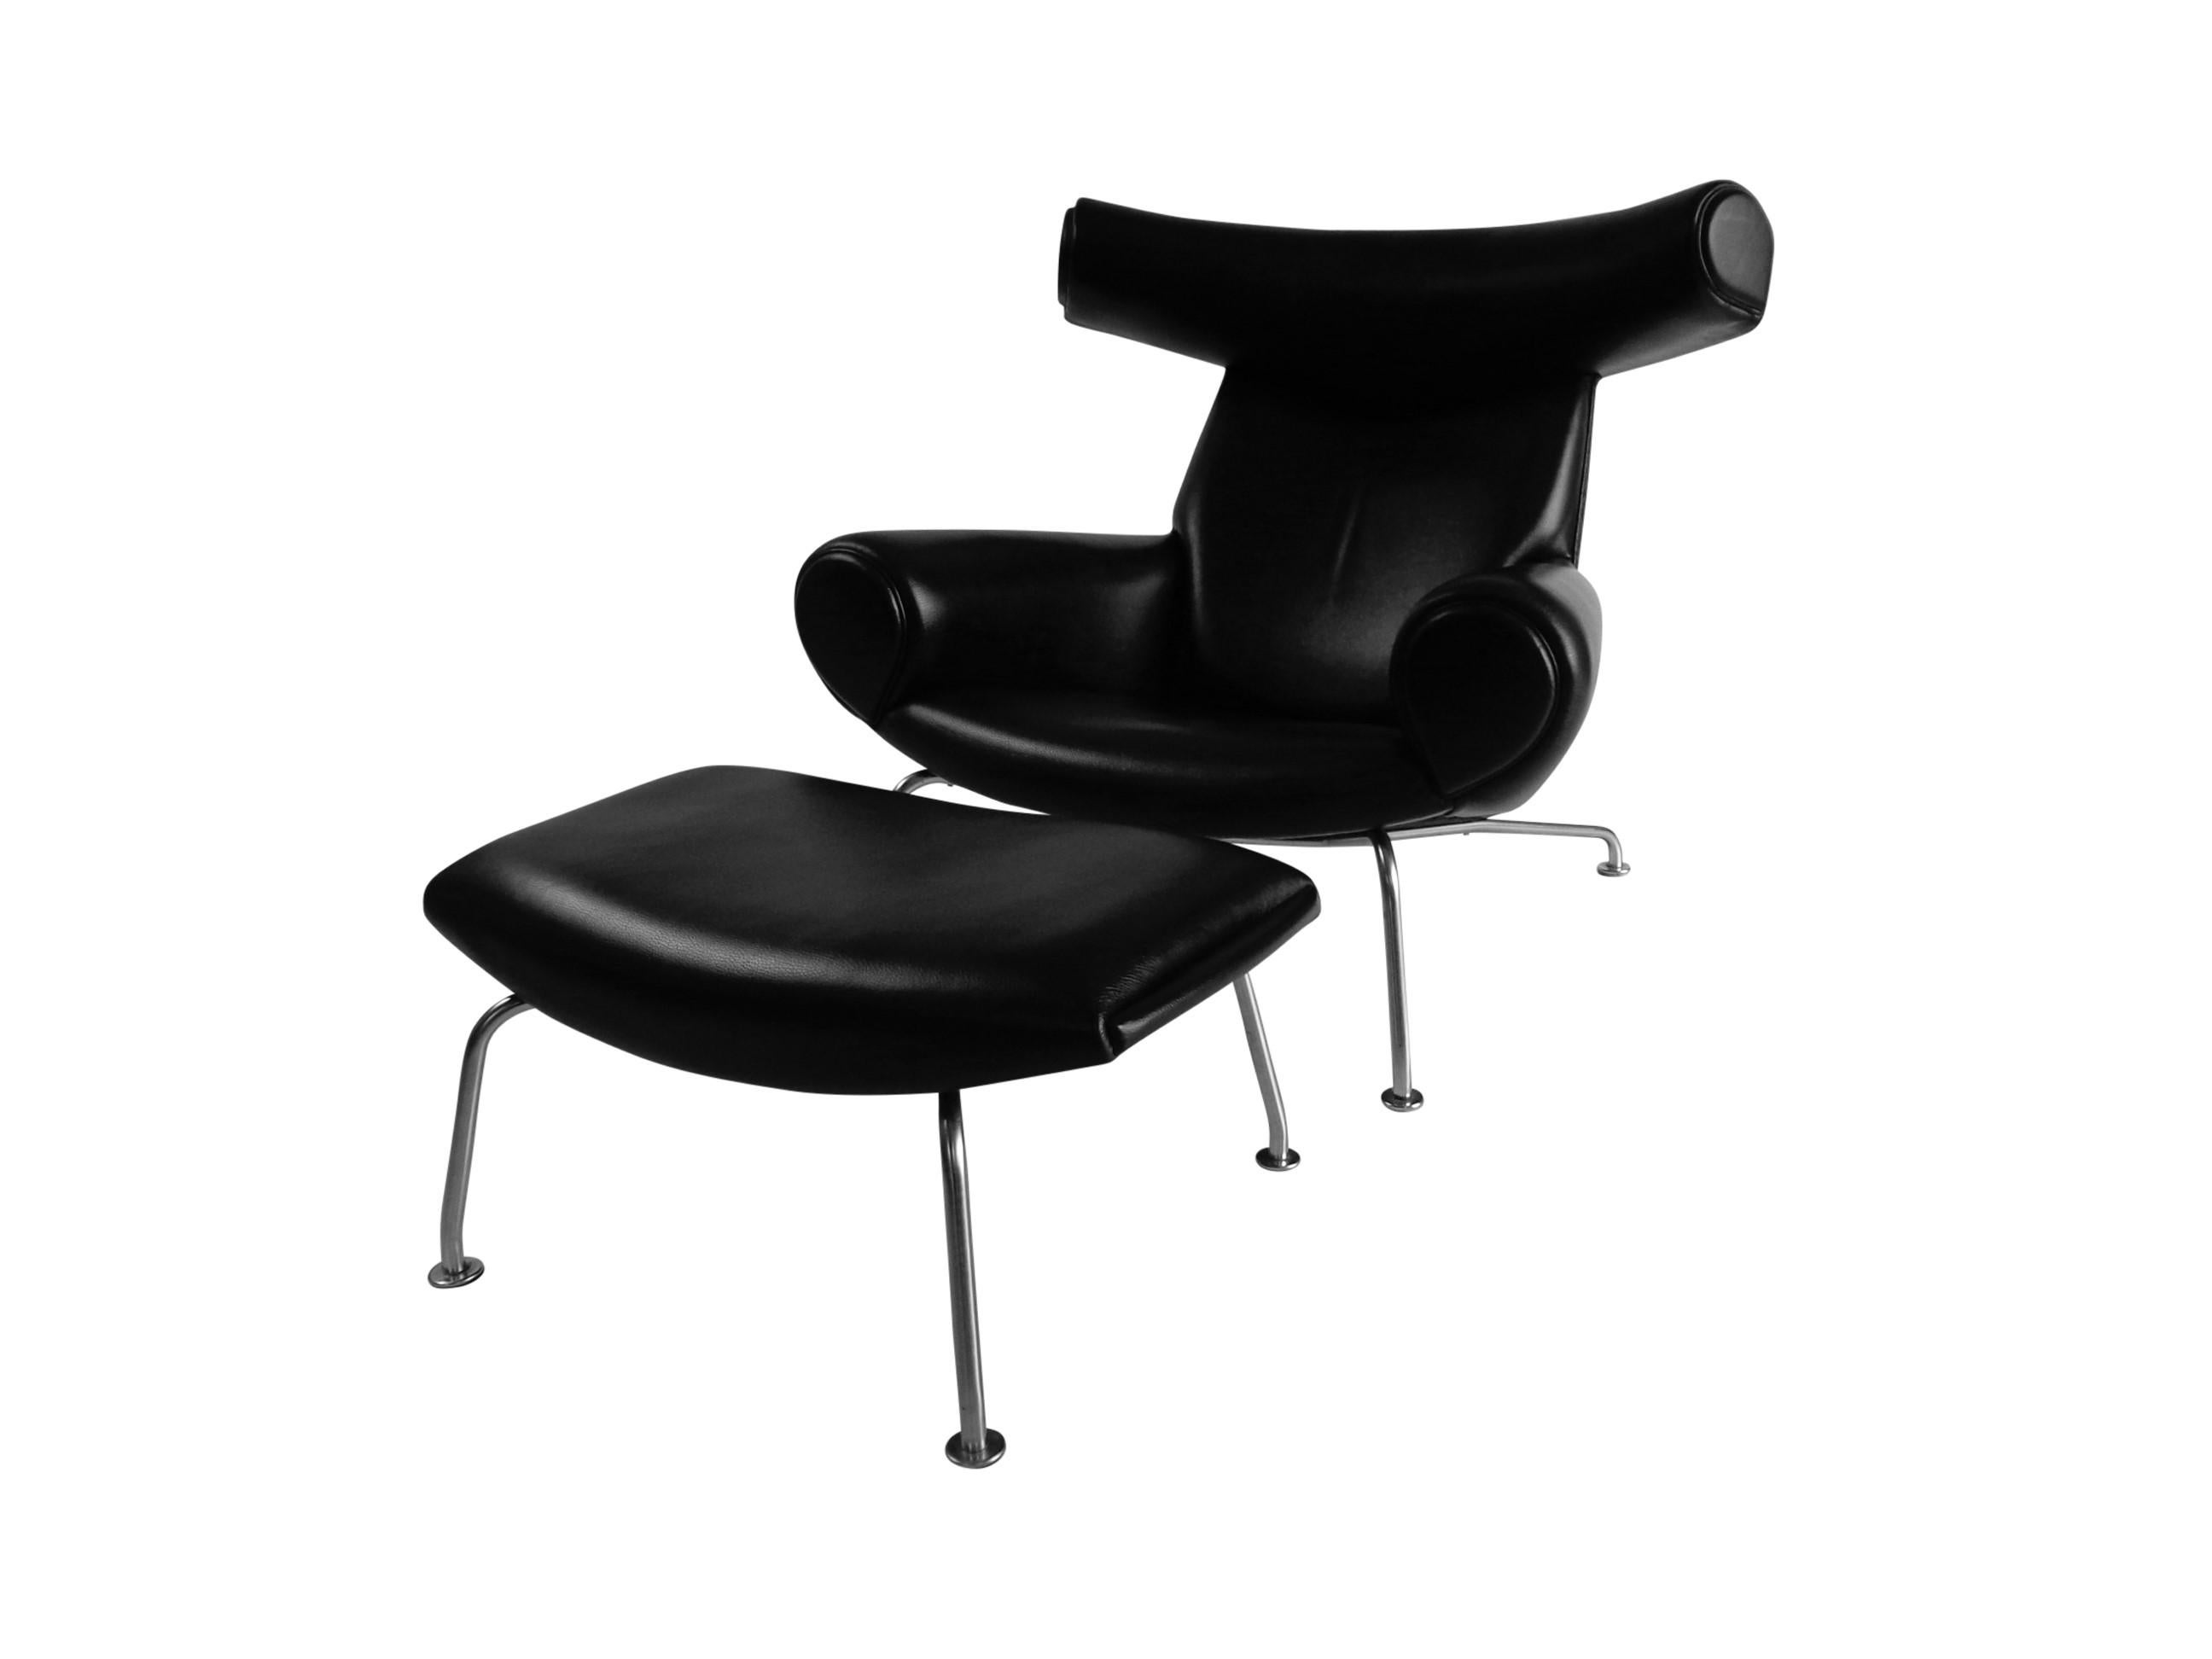 Hans Wegner, the Ox chair AP 46 and stool AP 49 in black leather by AP-Stolen, Denmark. One of Hans Wegner’s most important chairs, this piece was created as an extension of the ideas used in the Cow Horn Chair and the Bull Horn Chair. Its Special